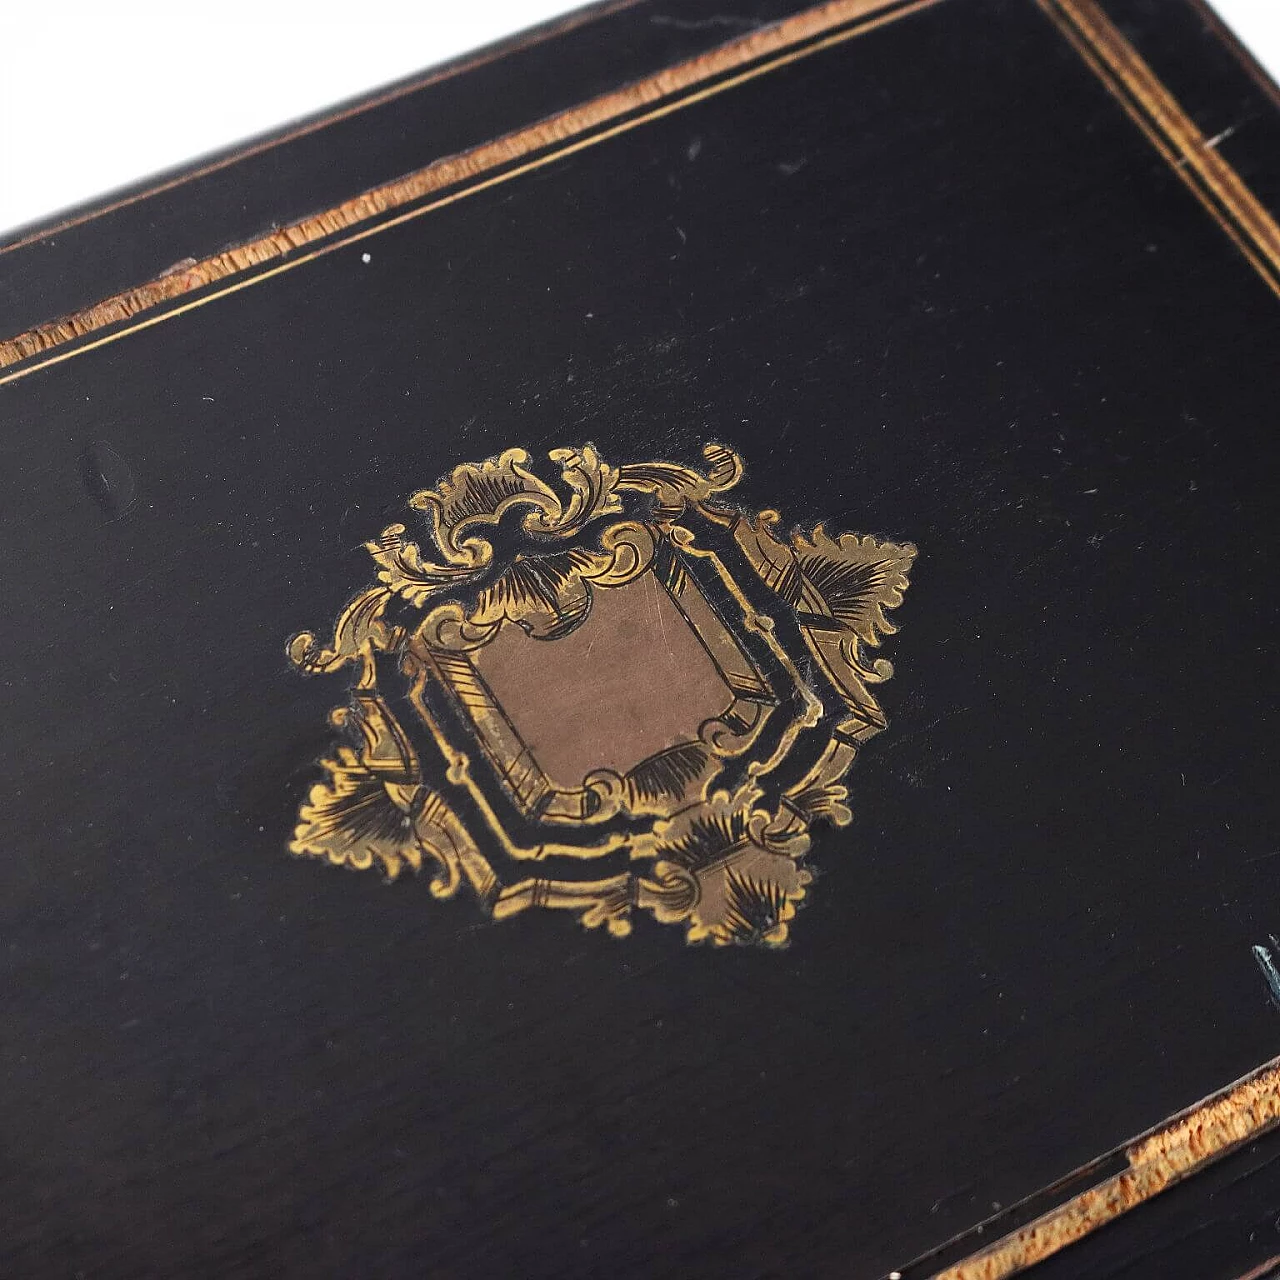 Ebony veneer sewing box with inlay and brass profiles, 19th century 17